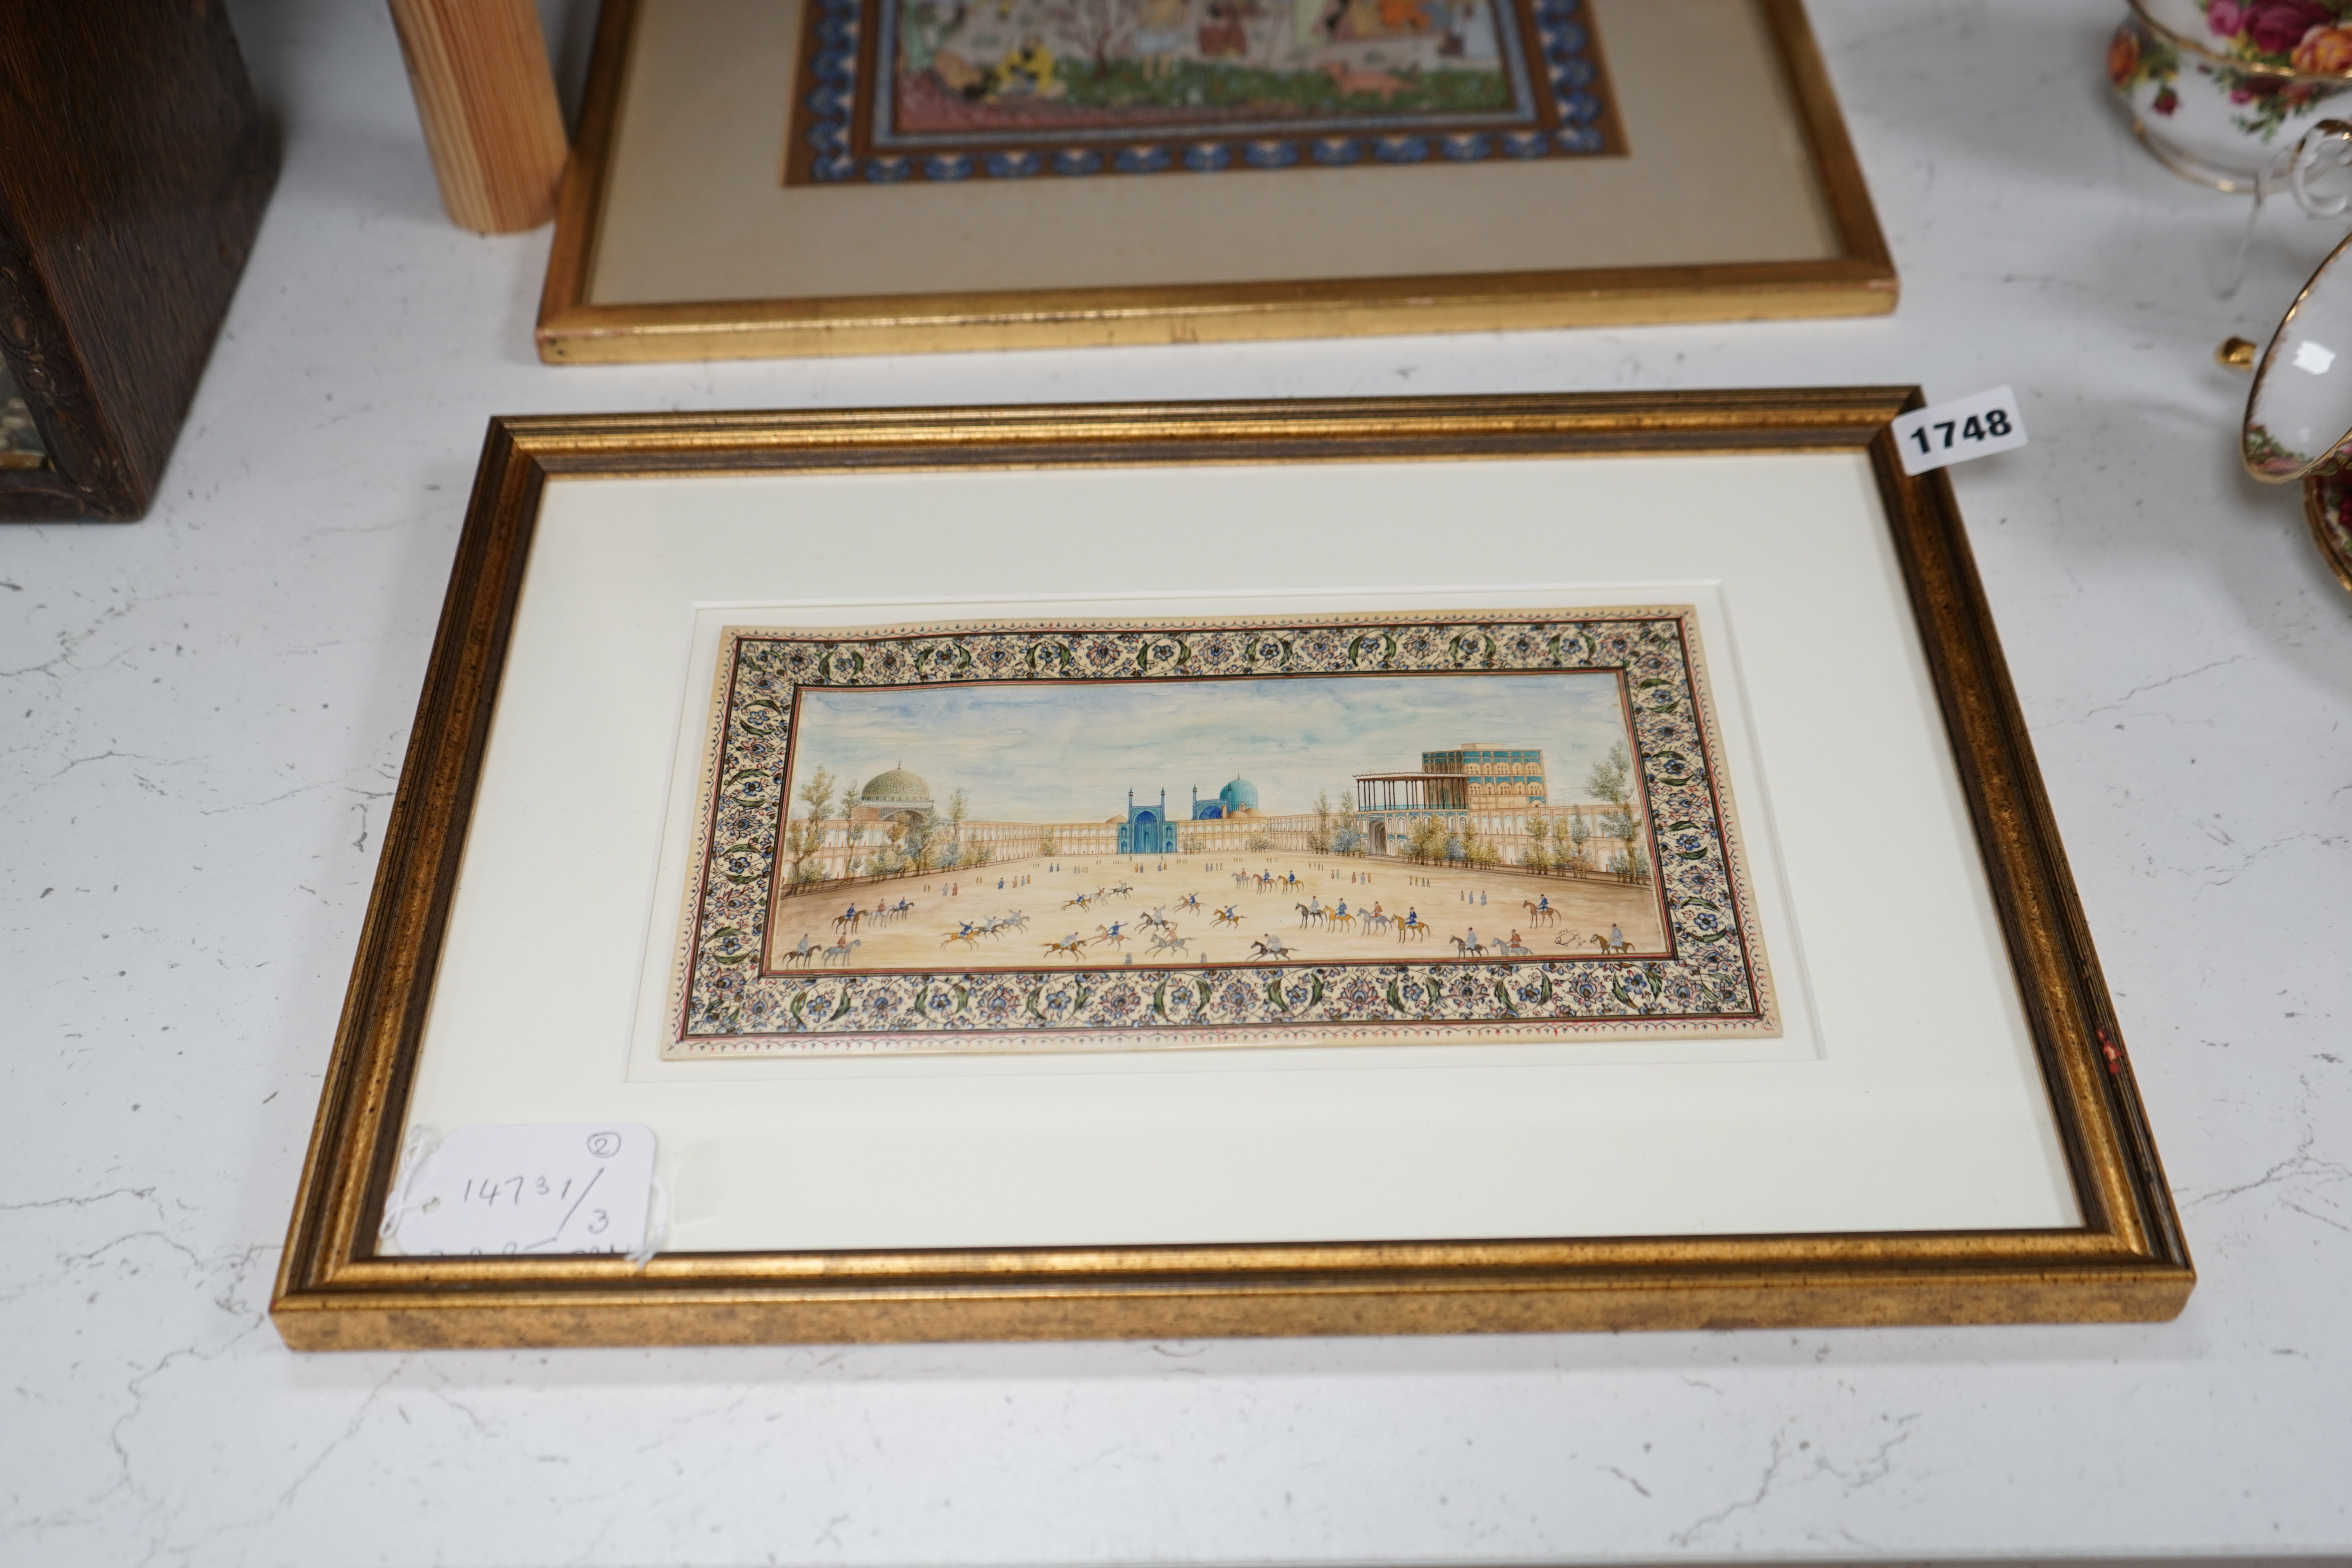 20th century, Persian School, watercolour on faux ivory panel, Figures on horseback together with similar watercolour on card, largest 33 x 25cm. Condition - fair to good